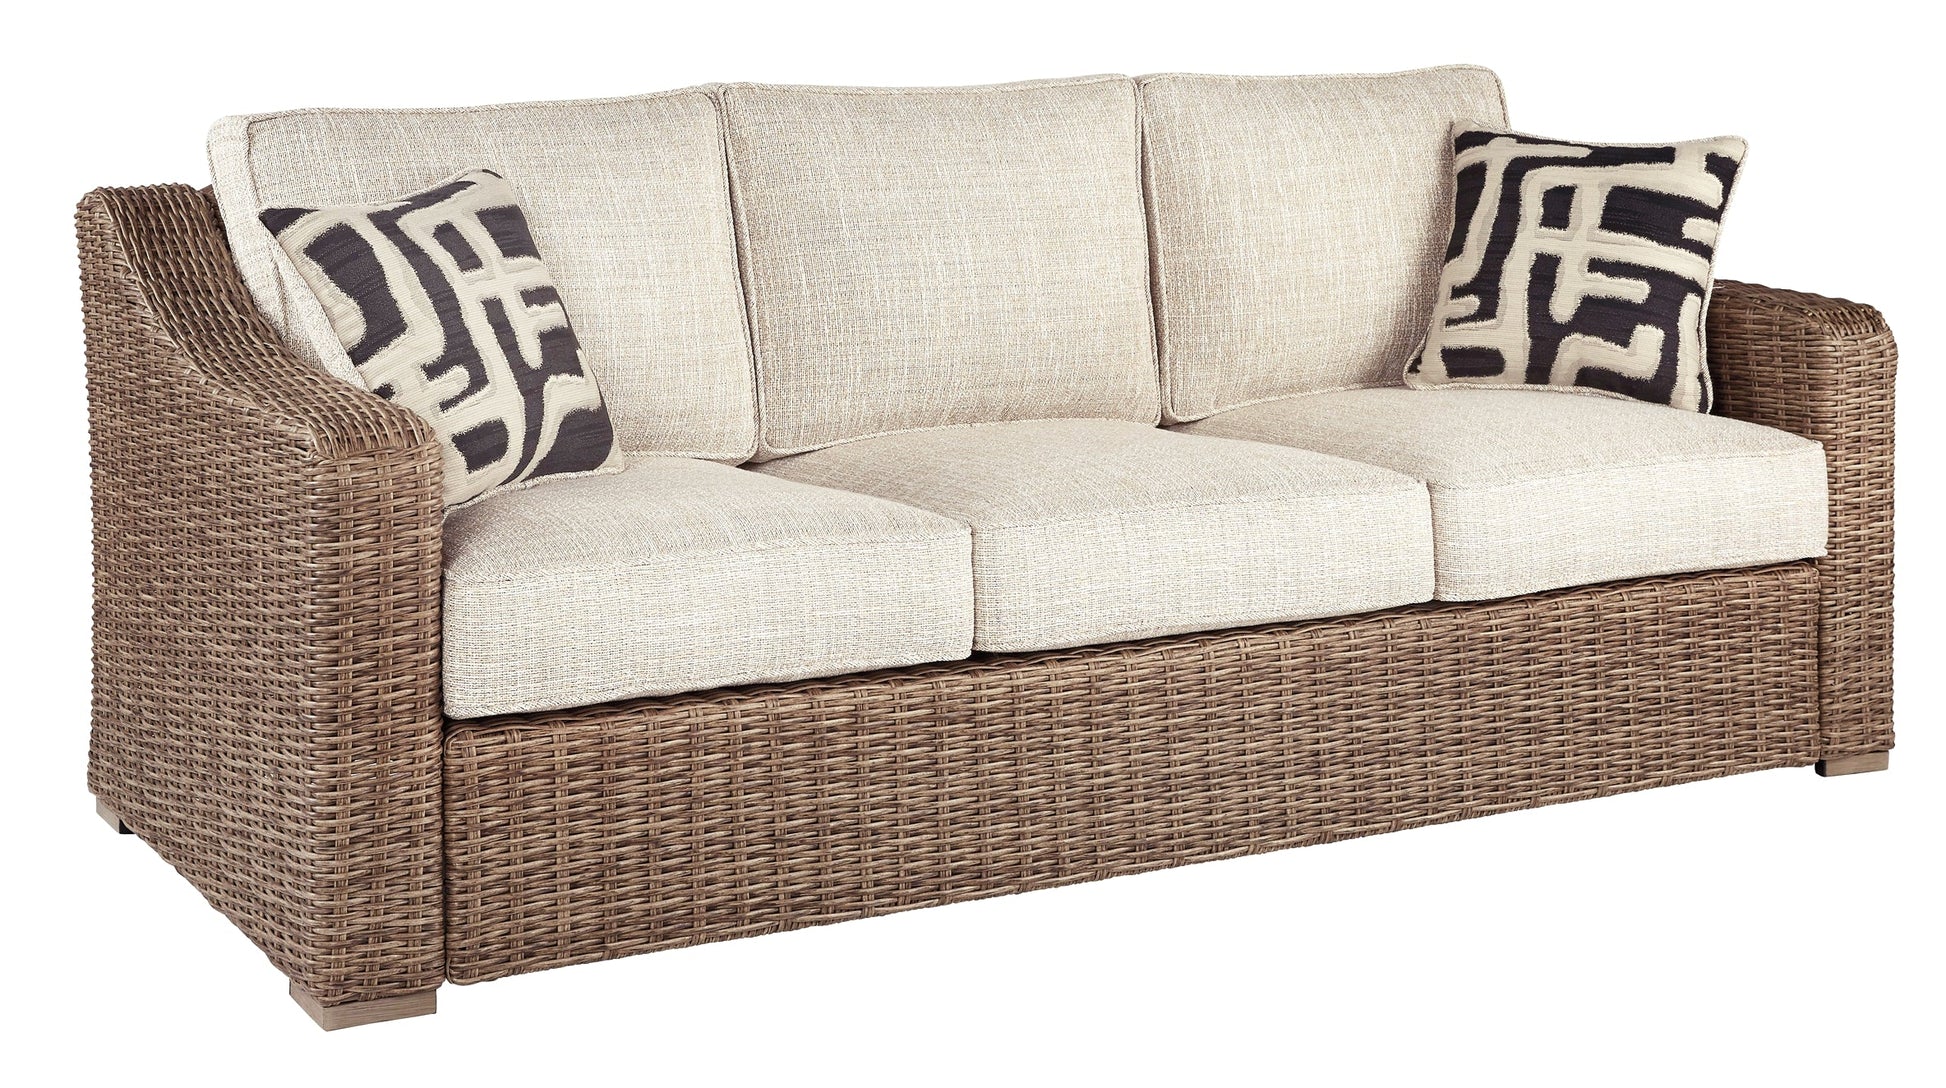 Beachcroft Sofa with Cushion Rent Wise Rent To Own Jacksonville, Florida